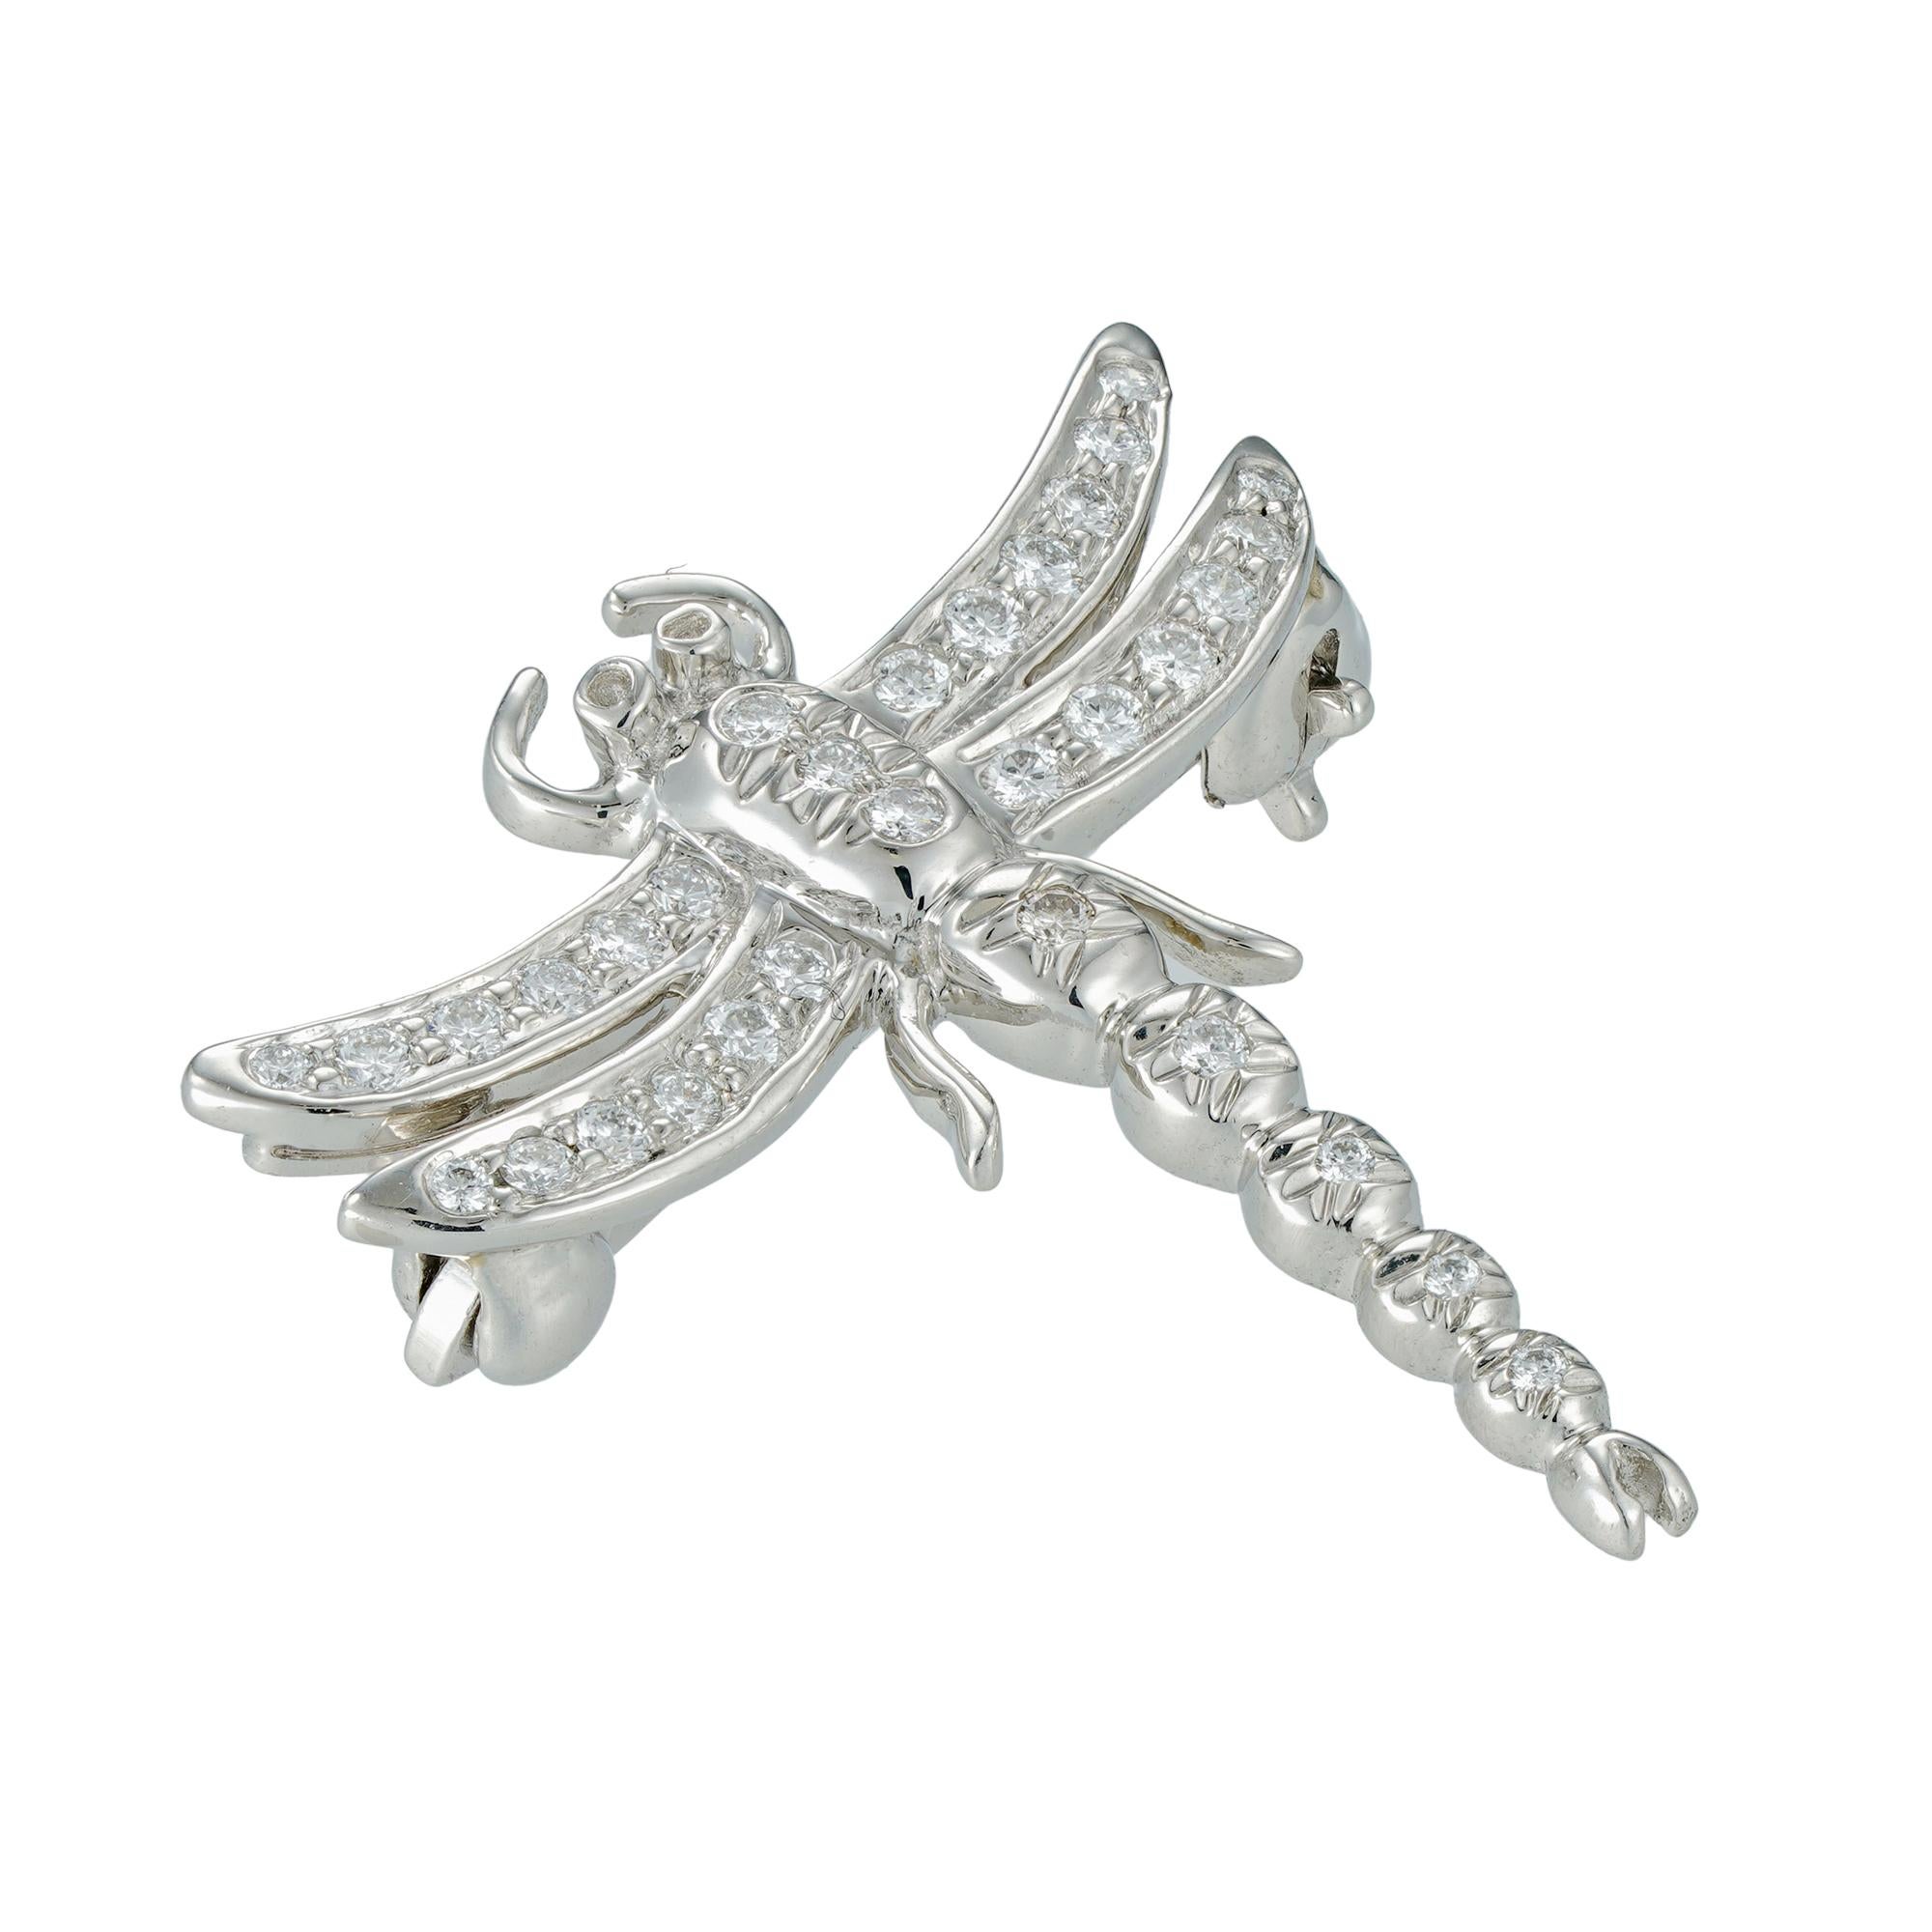 A diamond dragonfly brooch by Tiffany & Co, set with thirty-two round brilliant-cut diamonds estimated to weigh 0.5 carats in total, all set in platinum mount, signed Tiffany & Co, hallmarked platinum 950 London 2014, measuring approximately 2.1 x